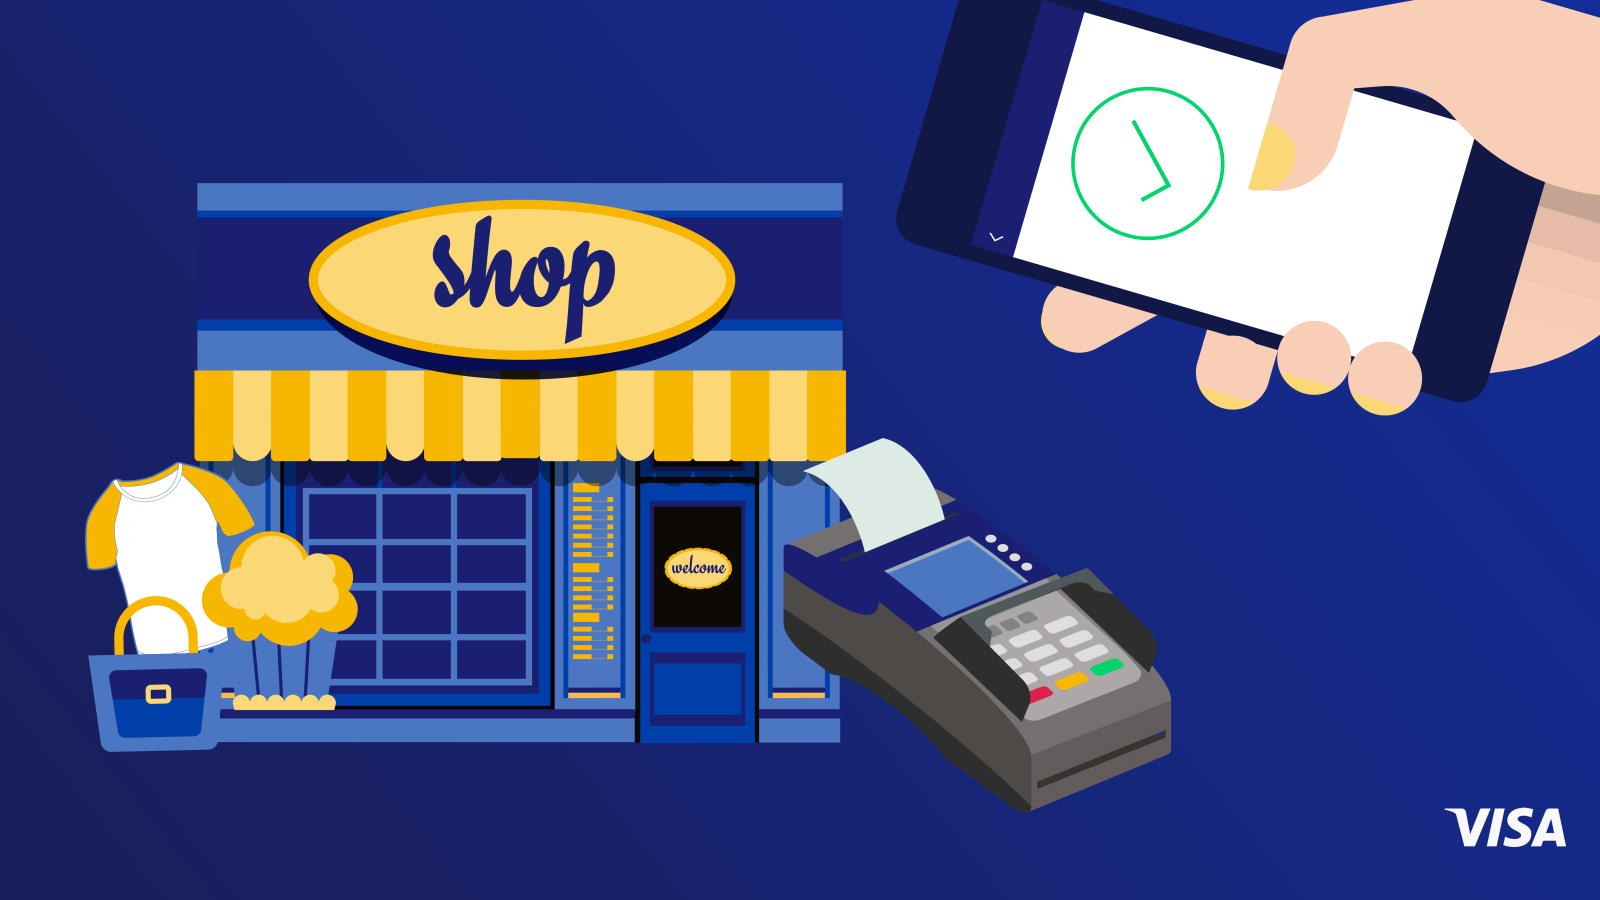 animation of shop with card machine, mobile and visa logo